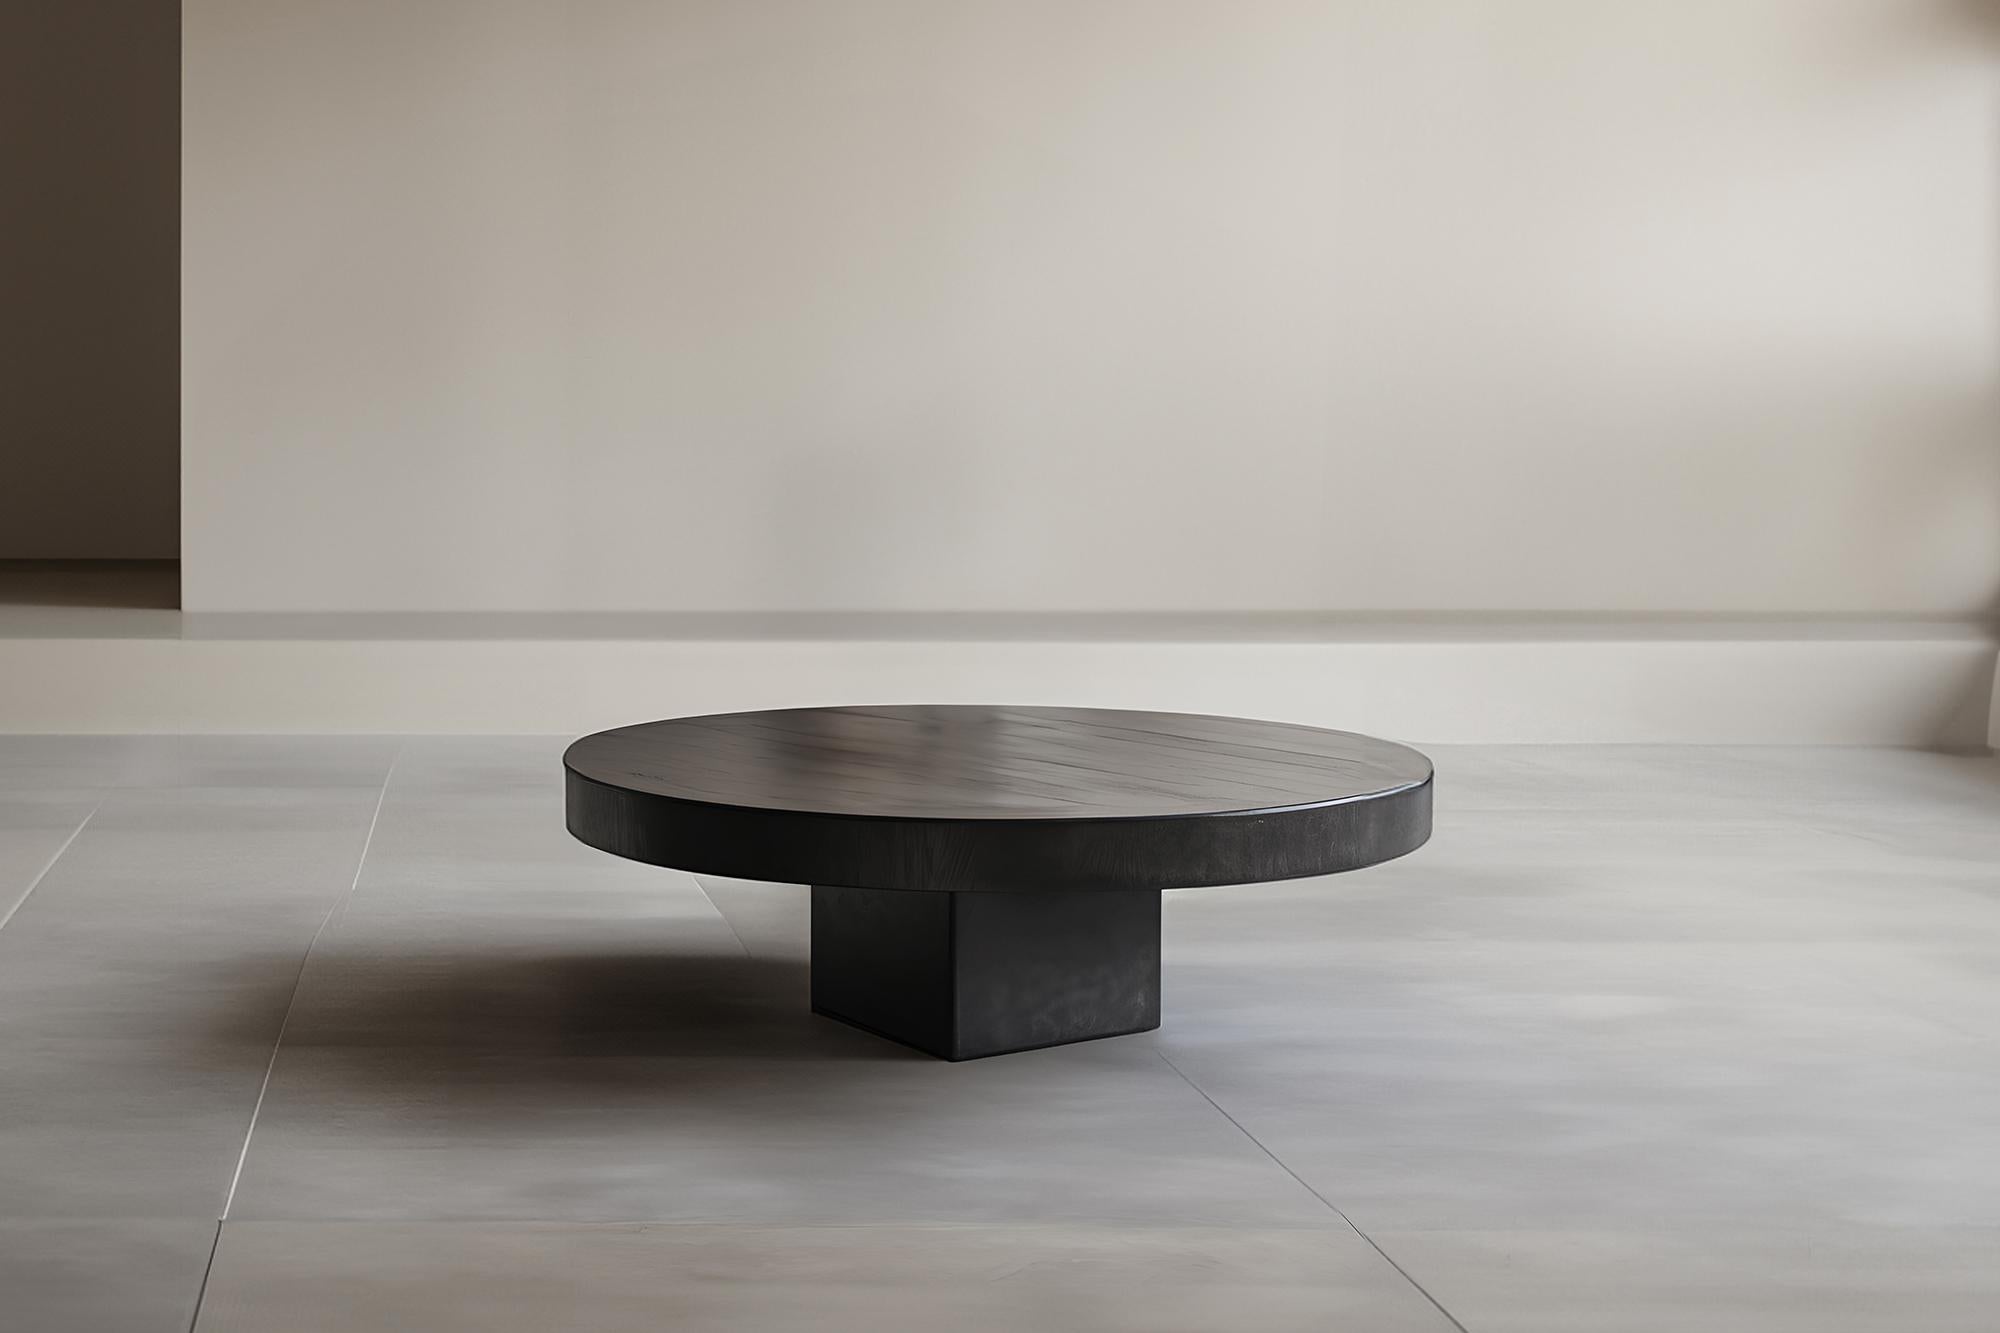 Chic Black Tinted Round Coffee Table - Urban Fundamenta 27 by NONO

Sculptural coffee table made of solid wood with a natural water-based or black tinted finish. Due to the nature of the production process, each piece may vary in grain, texture,